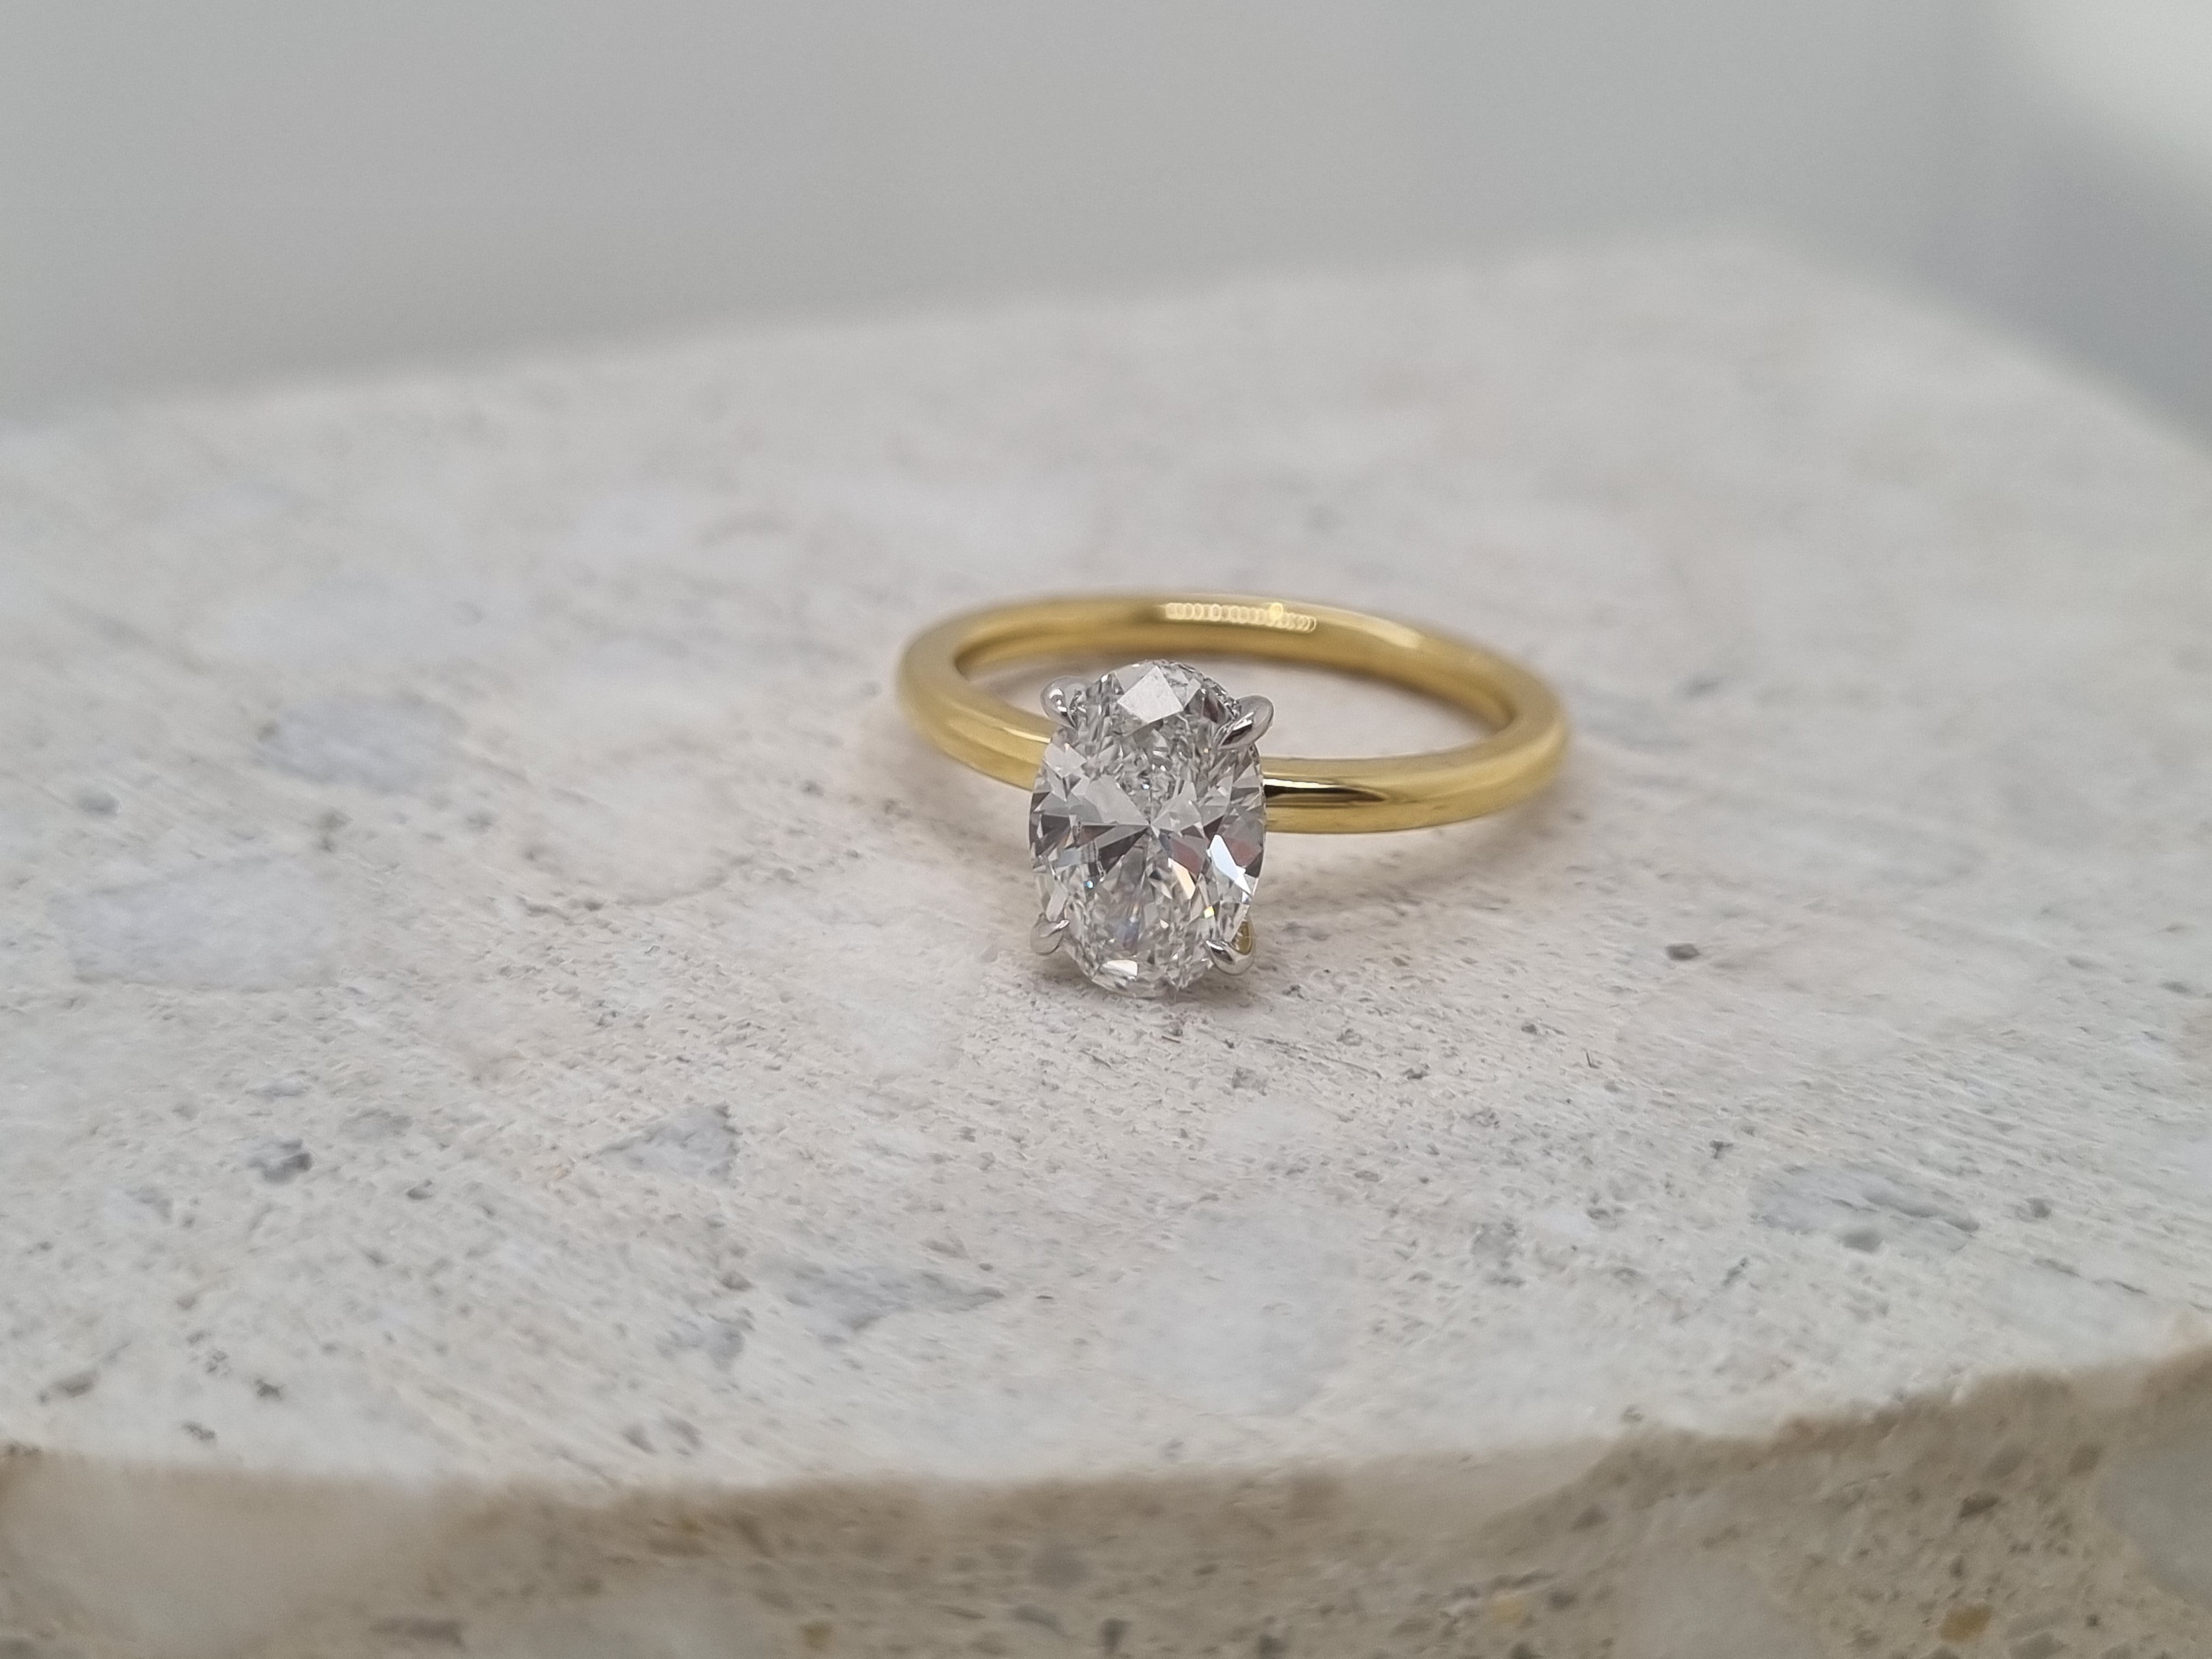 18ct Yellow and White Gold Vero Lab-Grown Oval Diamond ring, 1.57ct centre